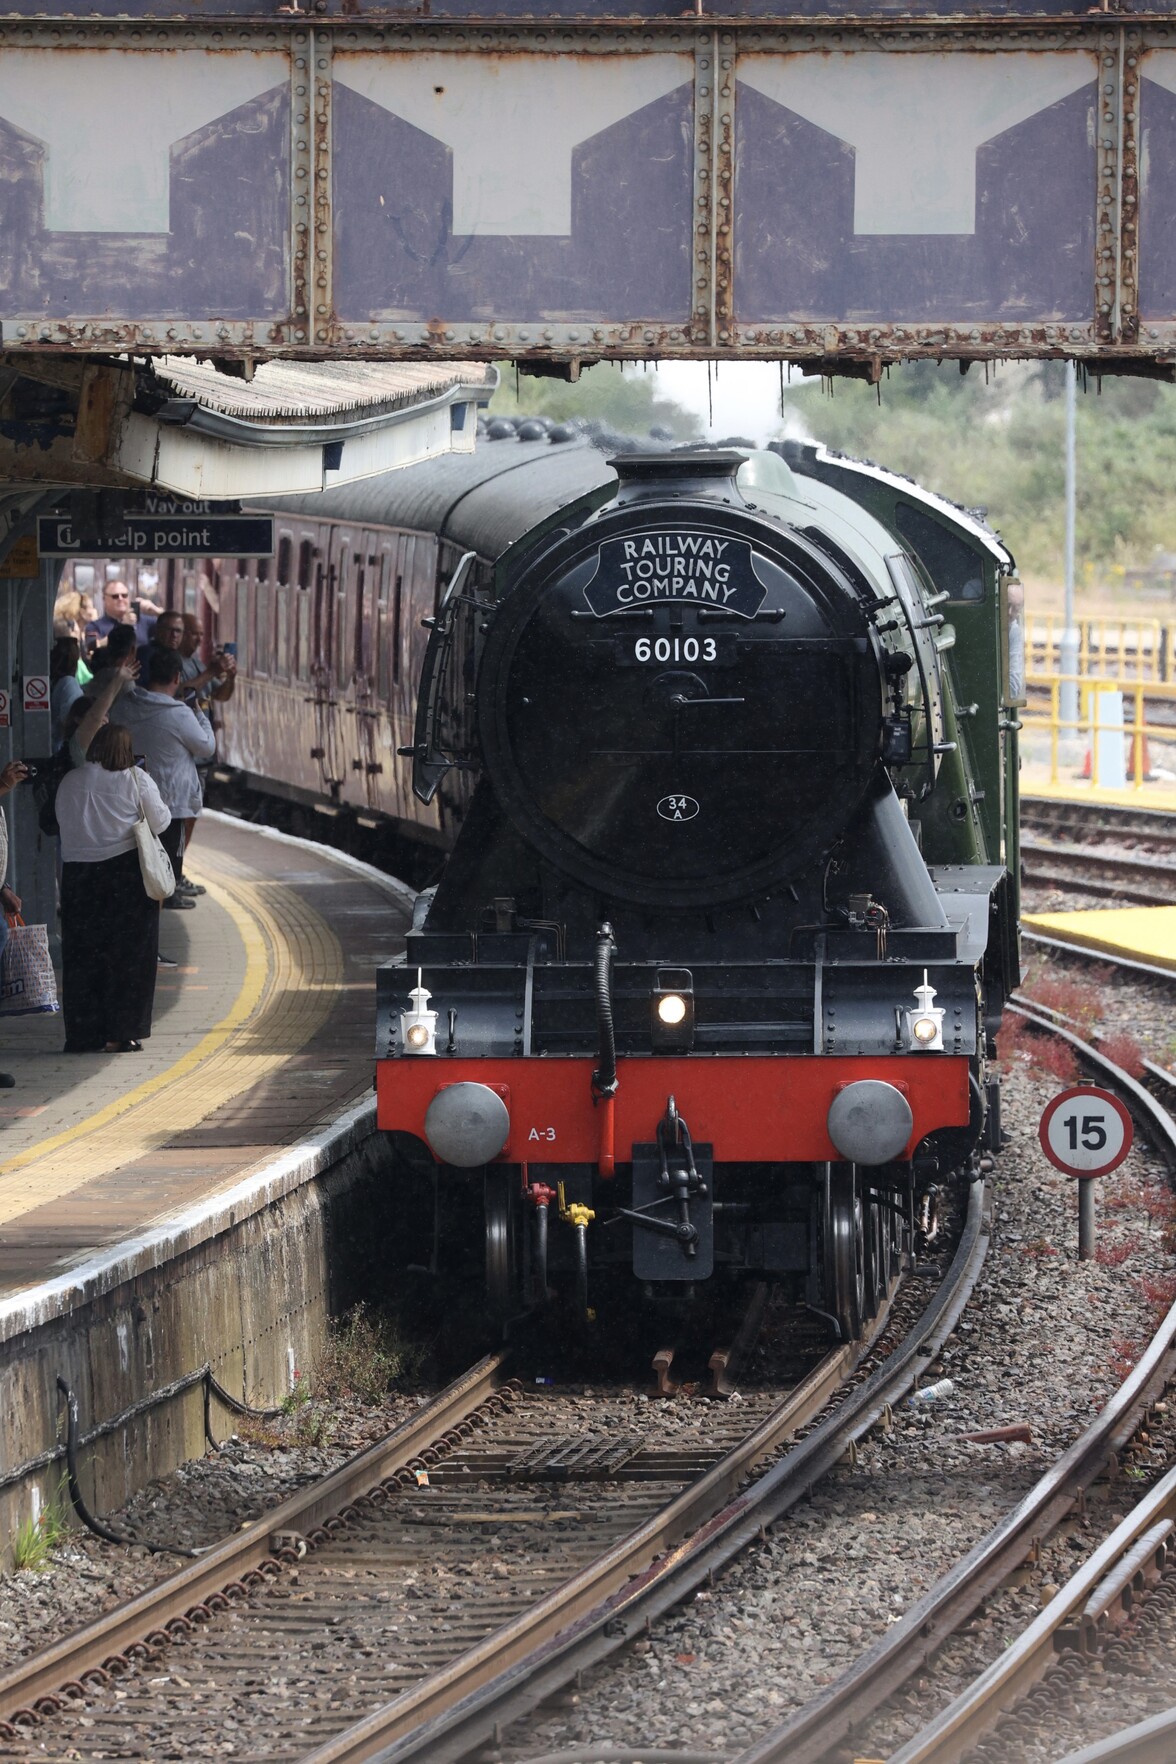 The front end of the Flying Scotsman at a train station. The Flying Scotsman is in dark green and black liver with a red front buffer block. To the right of the train there is a speed limit sign saying â€œ15â€�. The platform has several people looking at and taking pictures of the train 